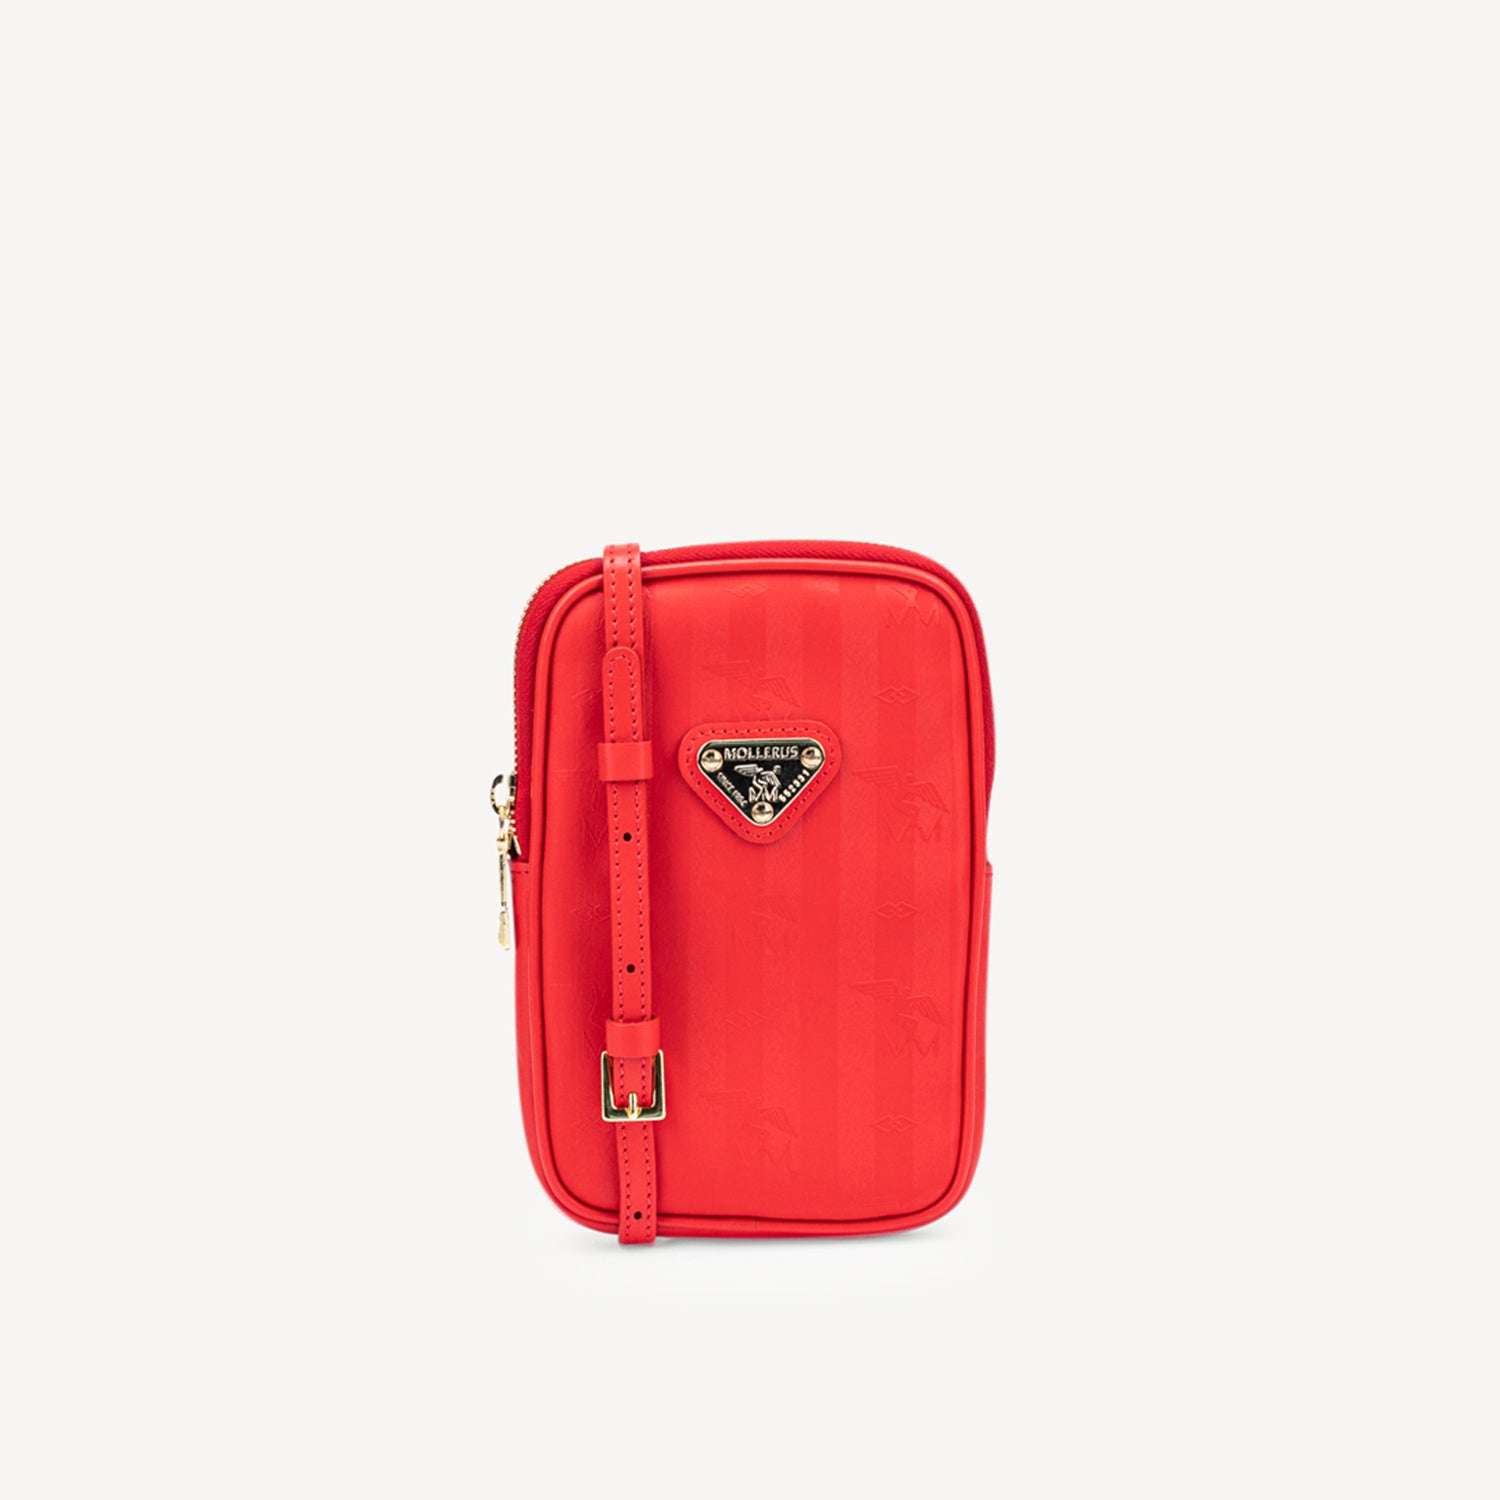 WILDHORN | mobile phone wallet red/gold